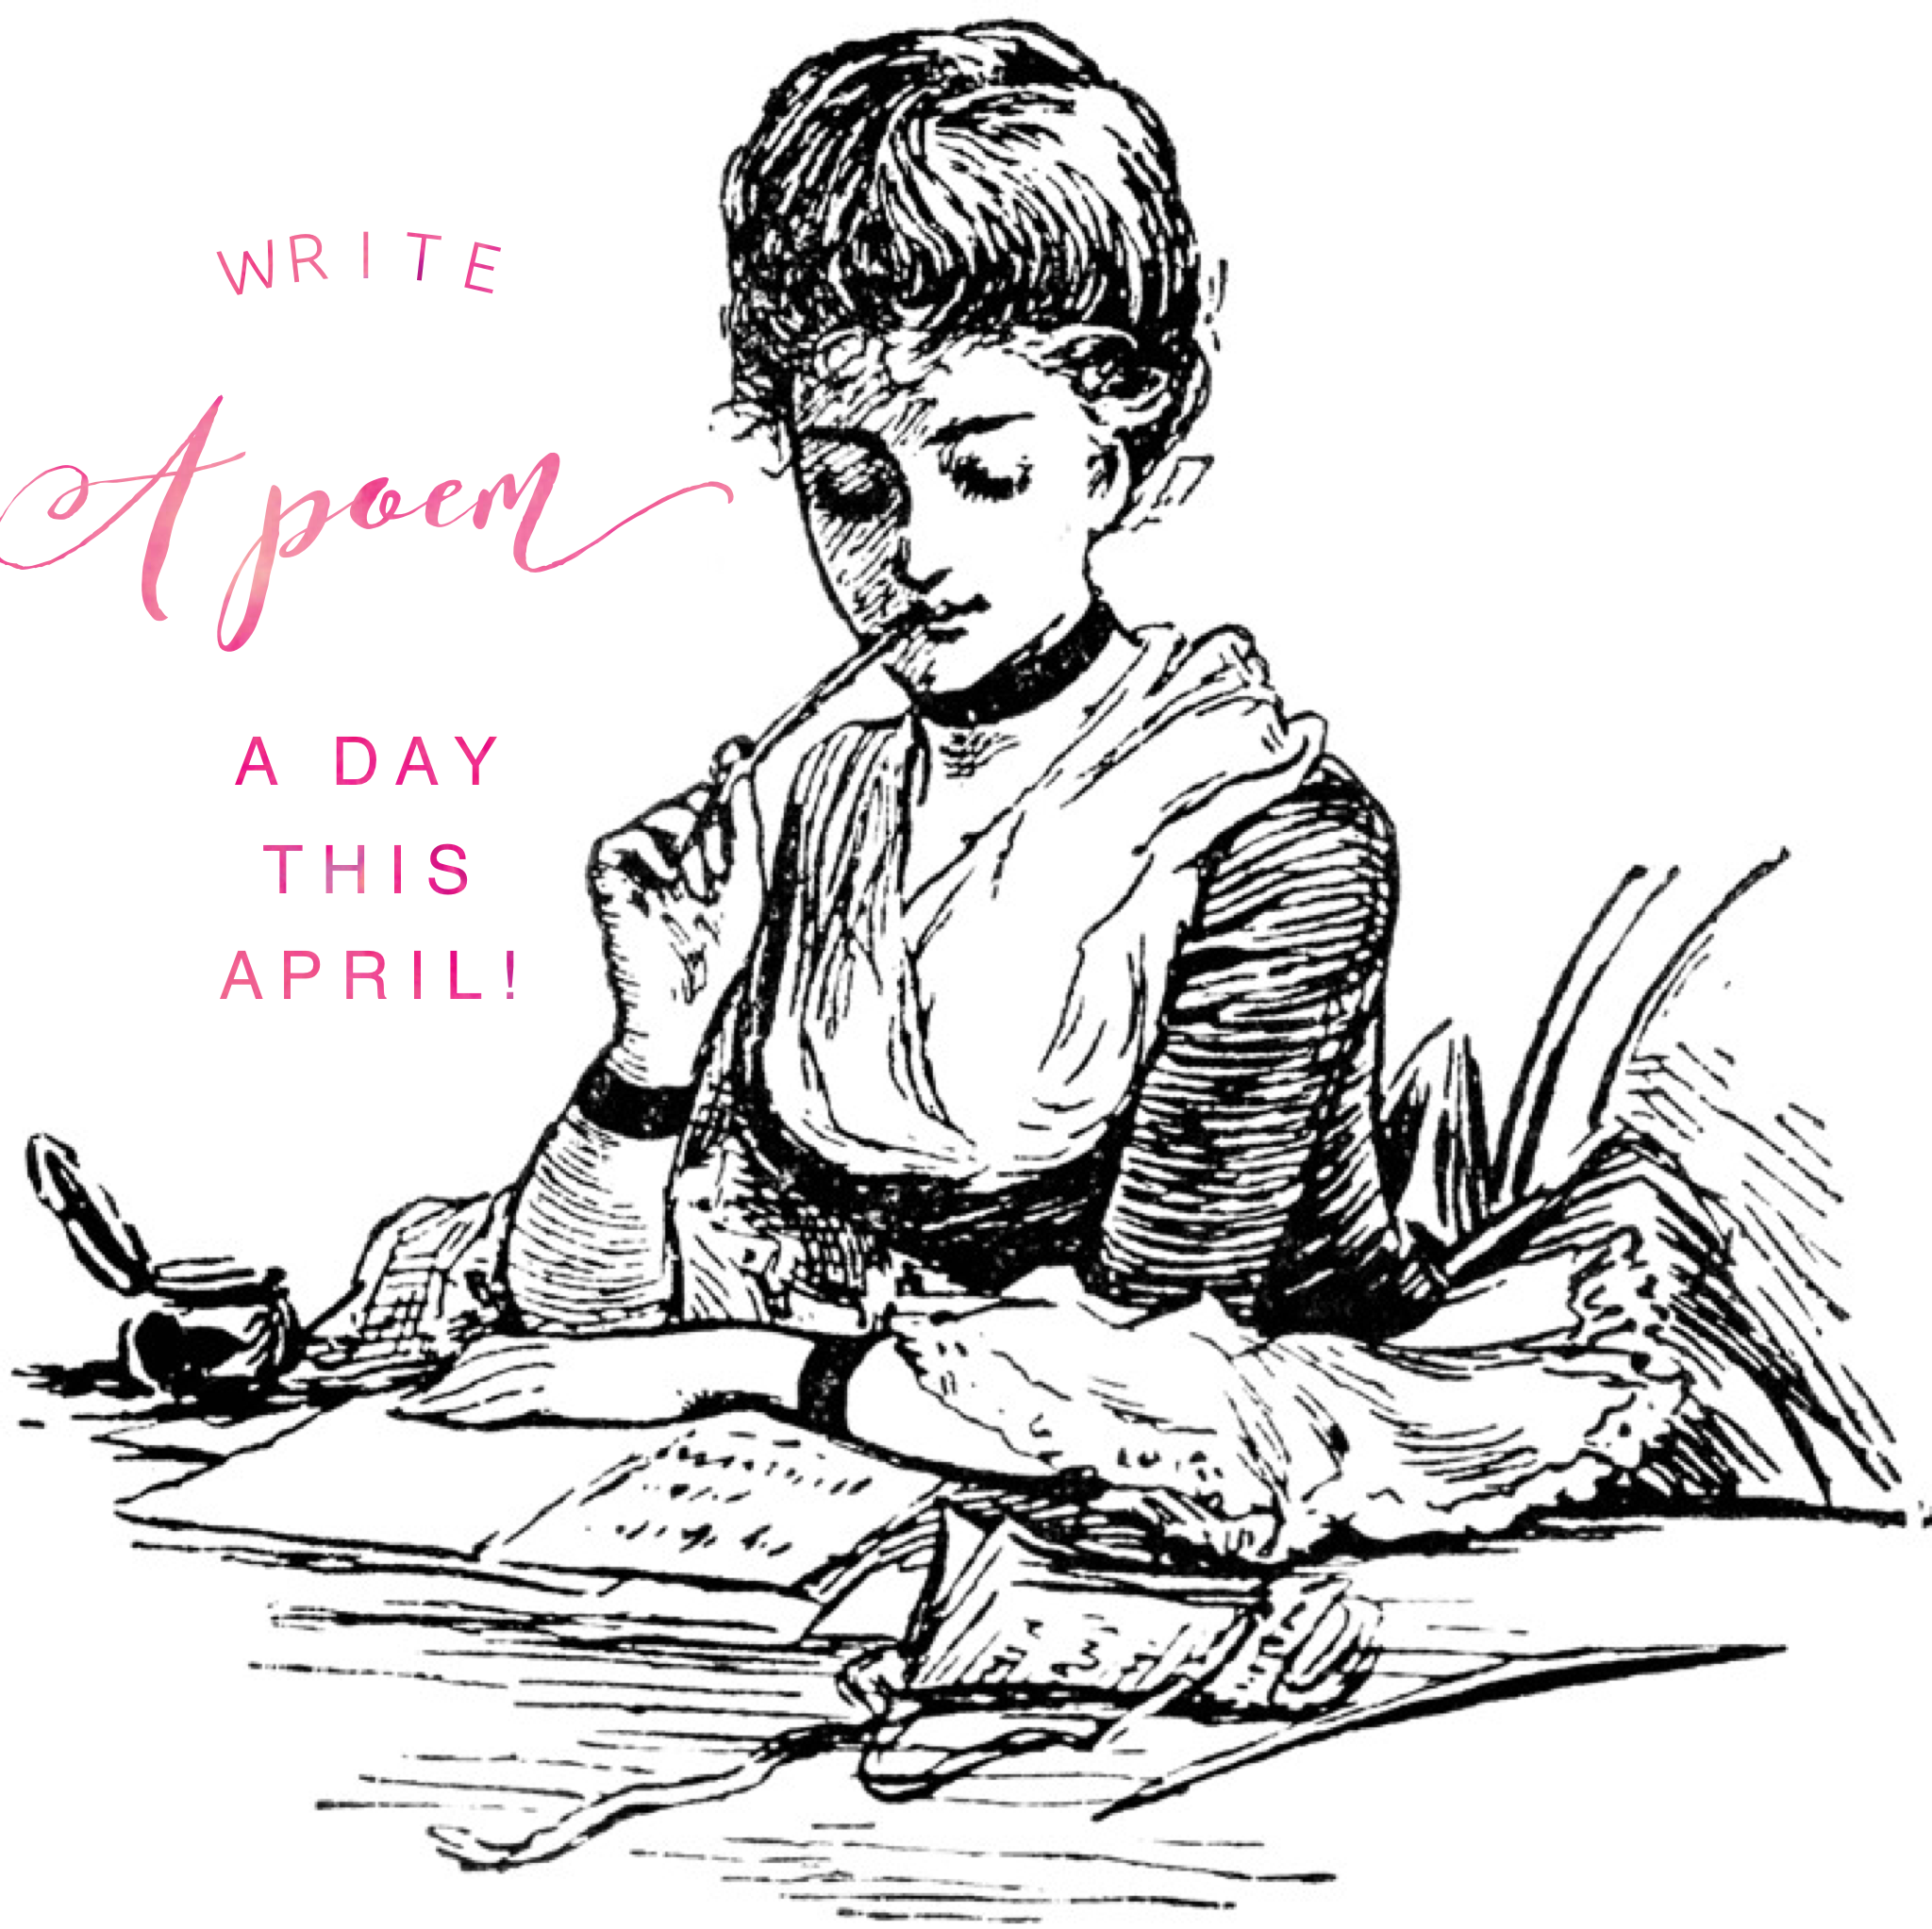 April Poetry write a poem a day!